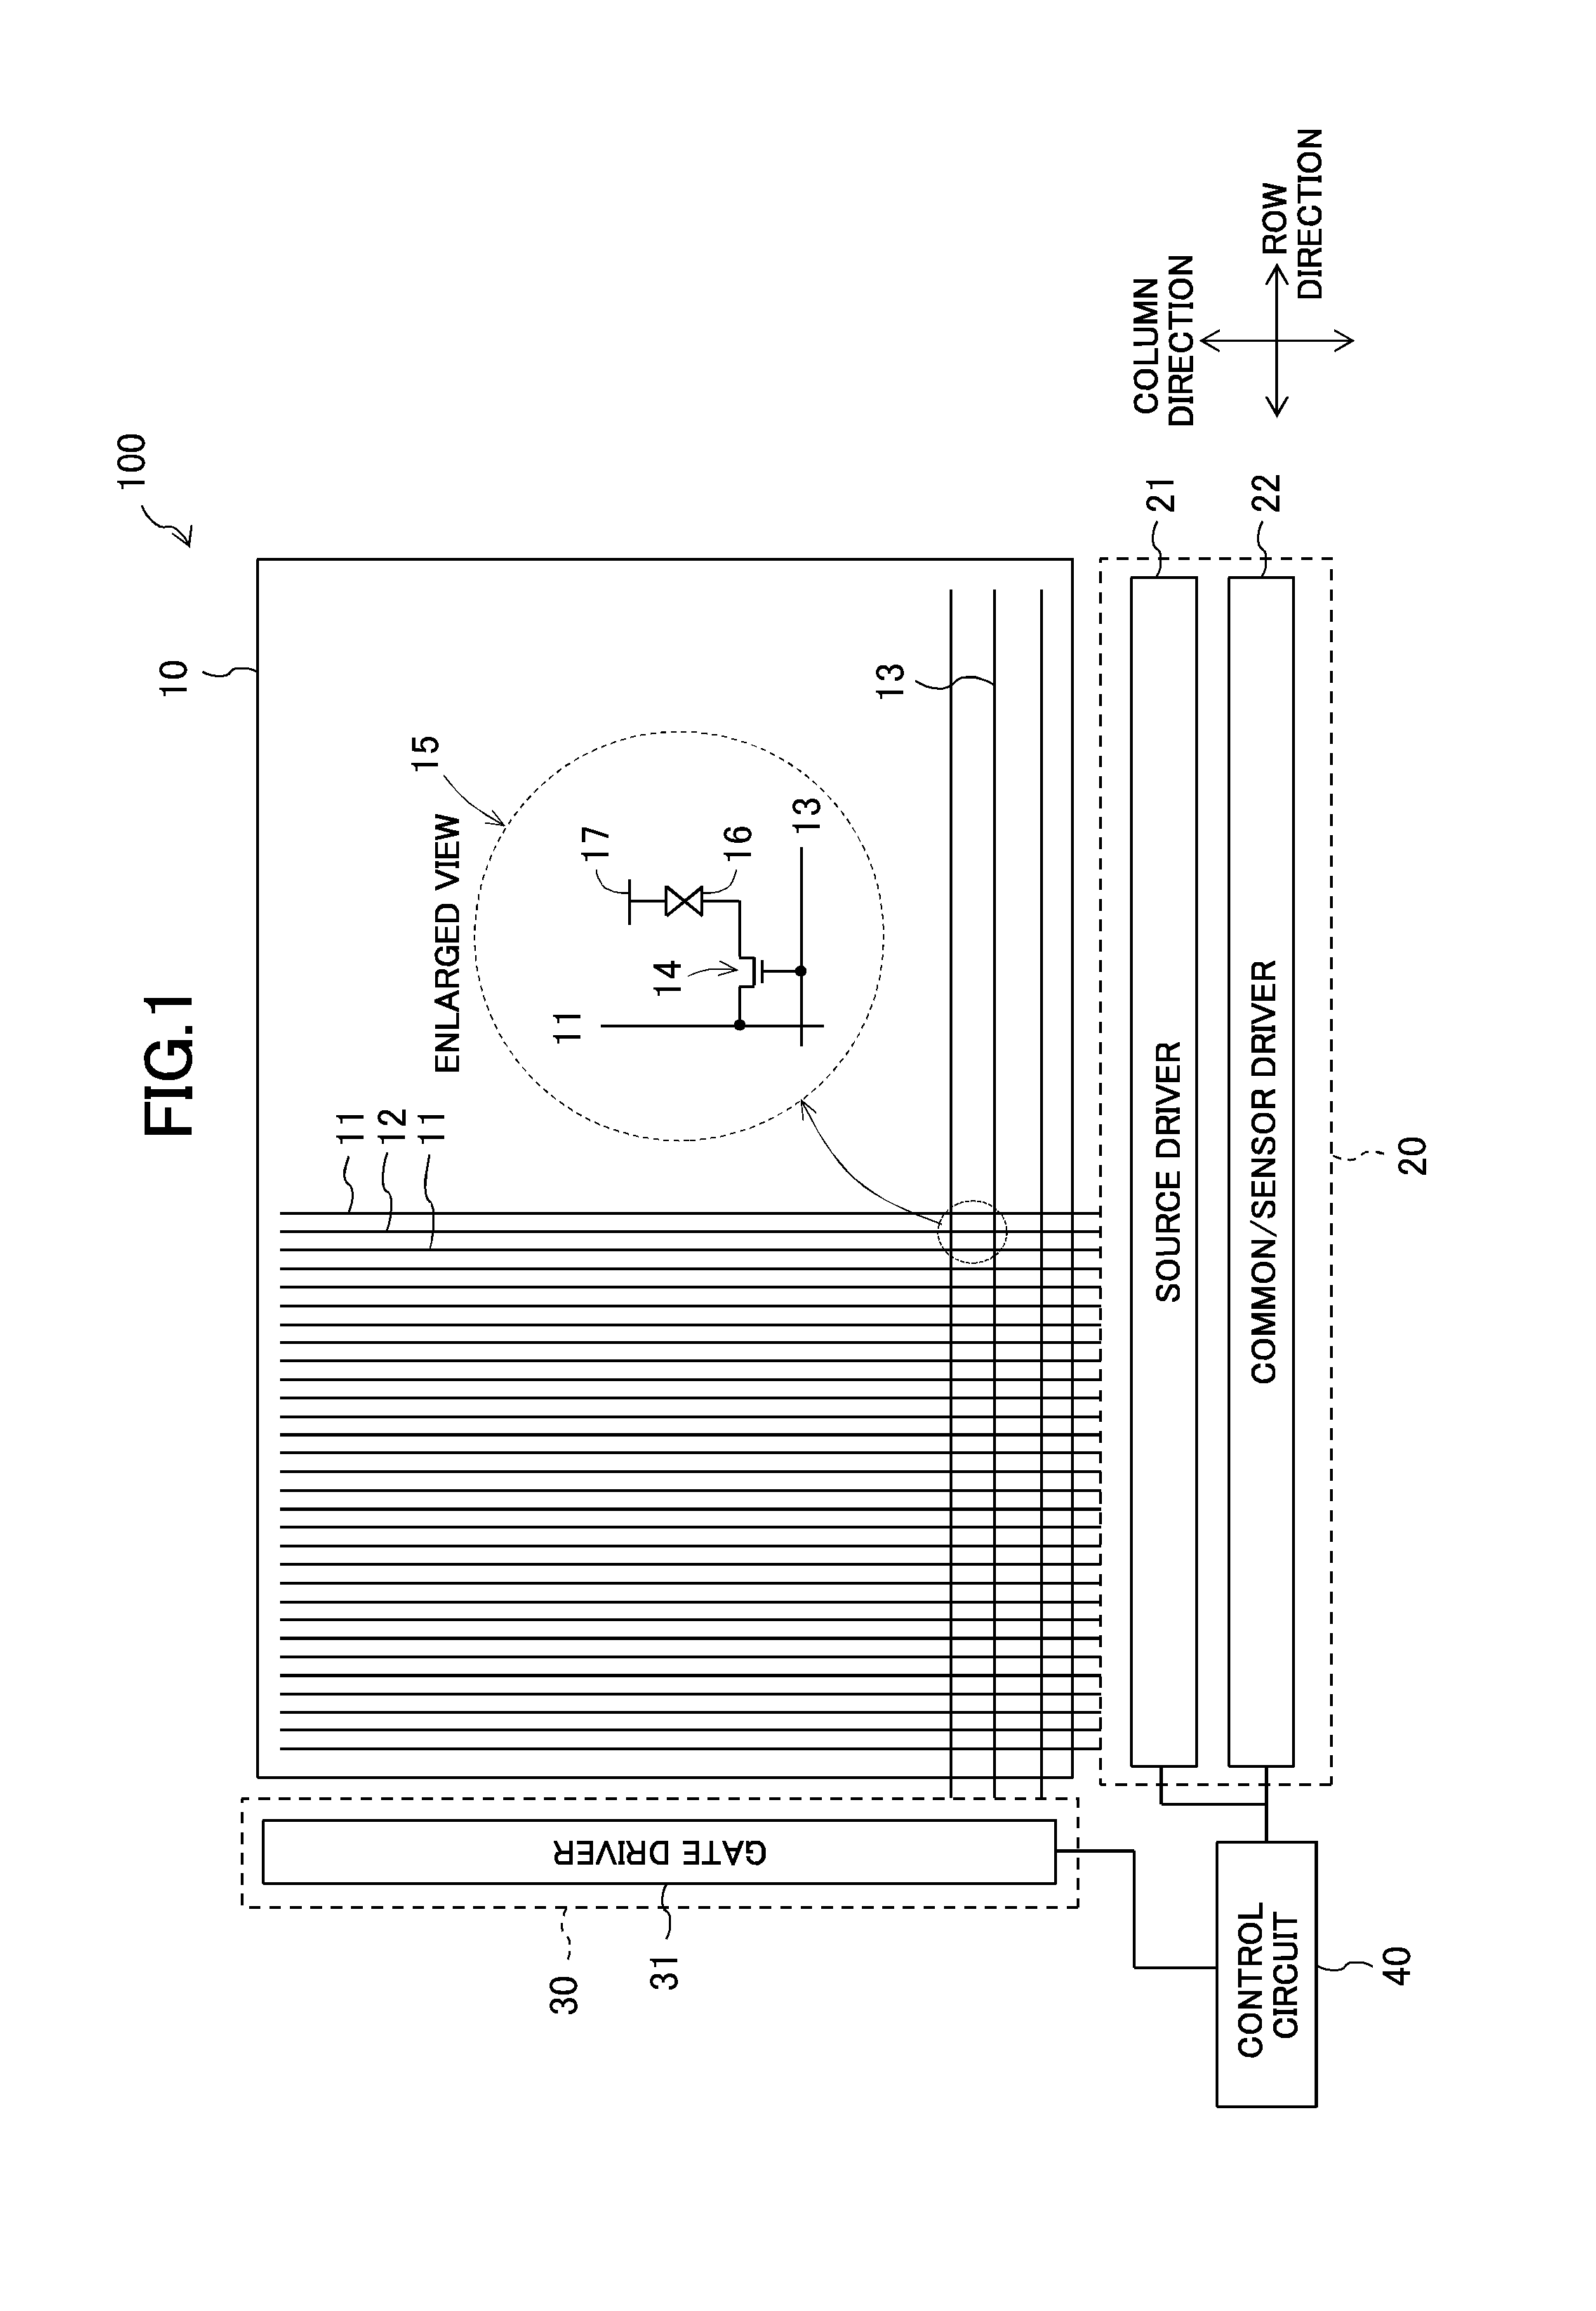 Display panel with touch detection function